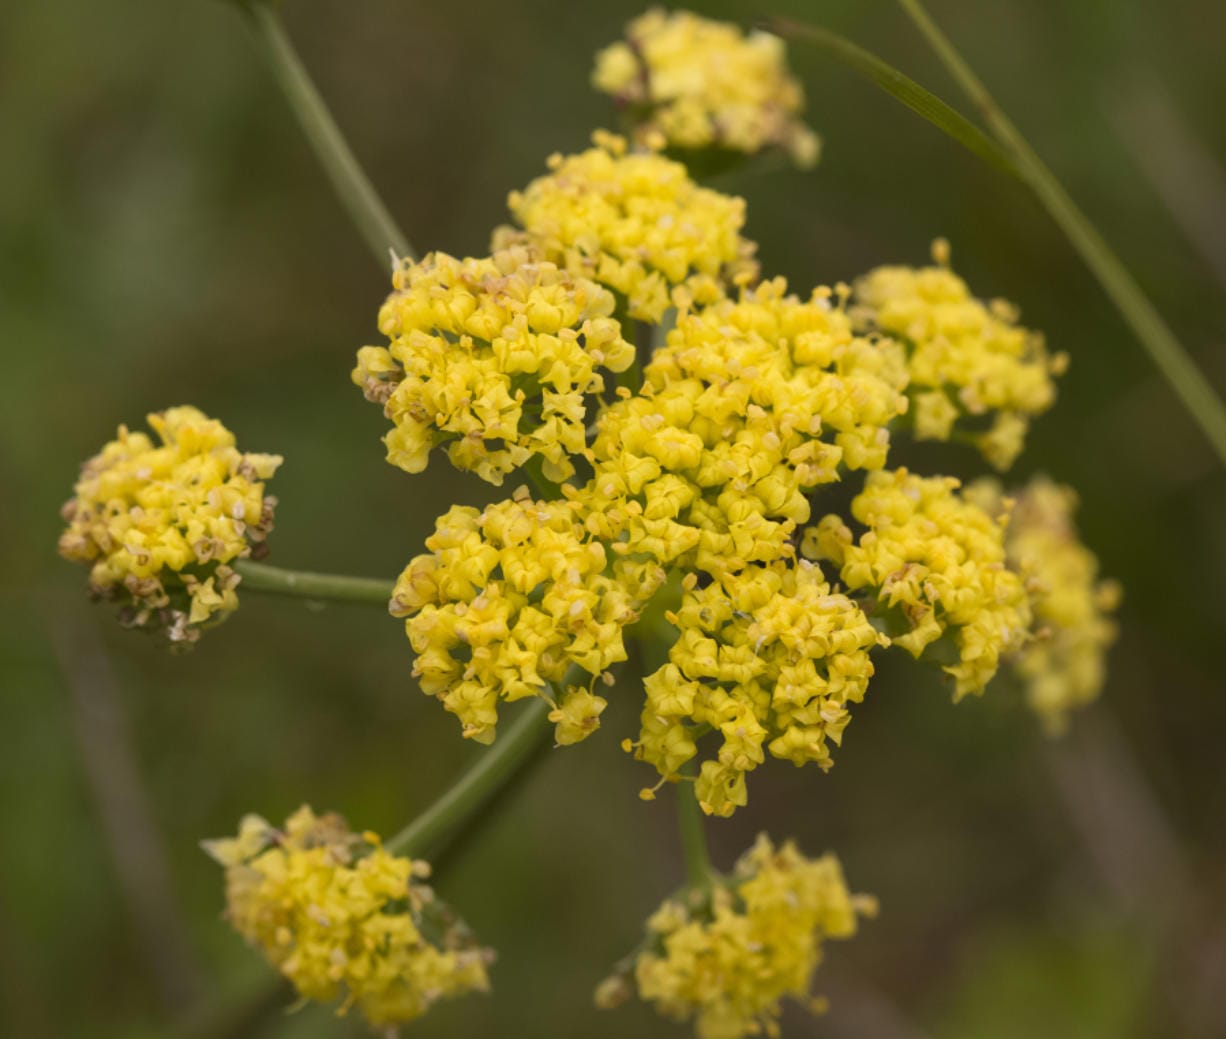 Bradshaw&#039;s lomatium, which has a large population outside Camas, was listed as an endangered species in 1988 but has recovered to the point that it could be delisted under the Endangered Species Act. (Peter Pearsall/U.S.